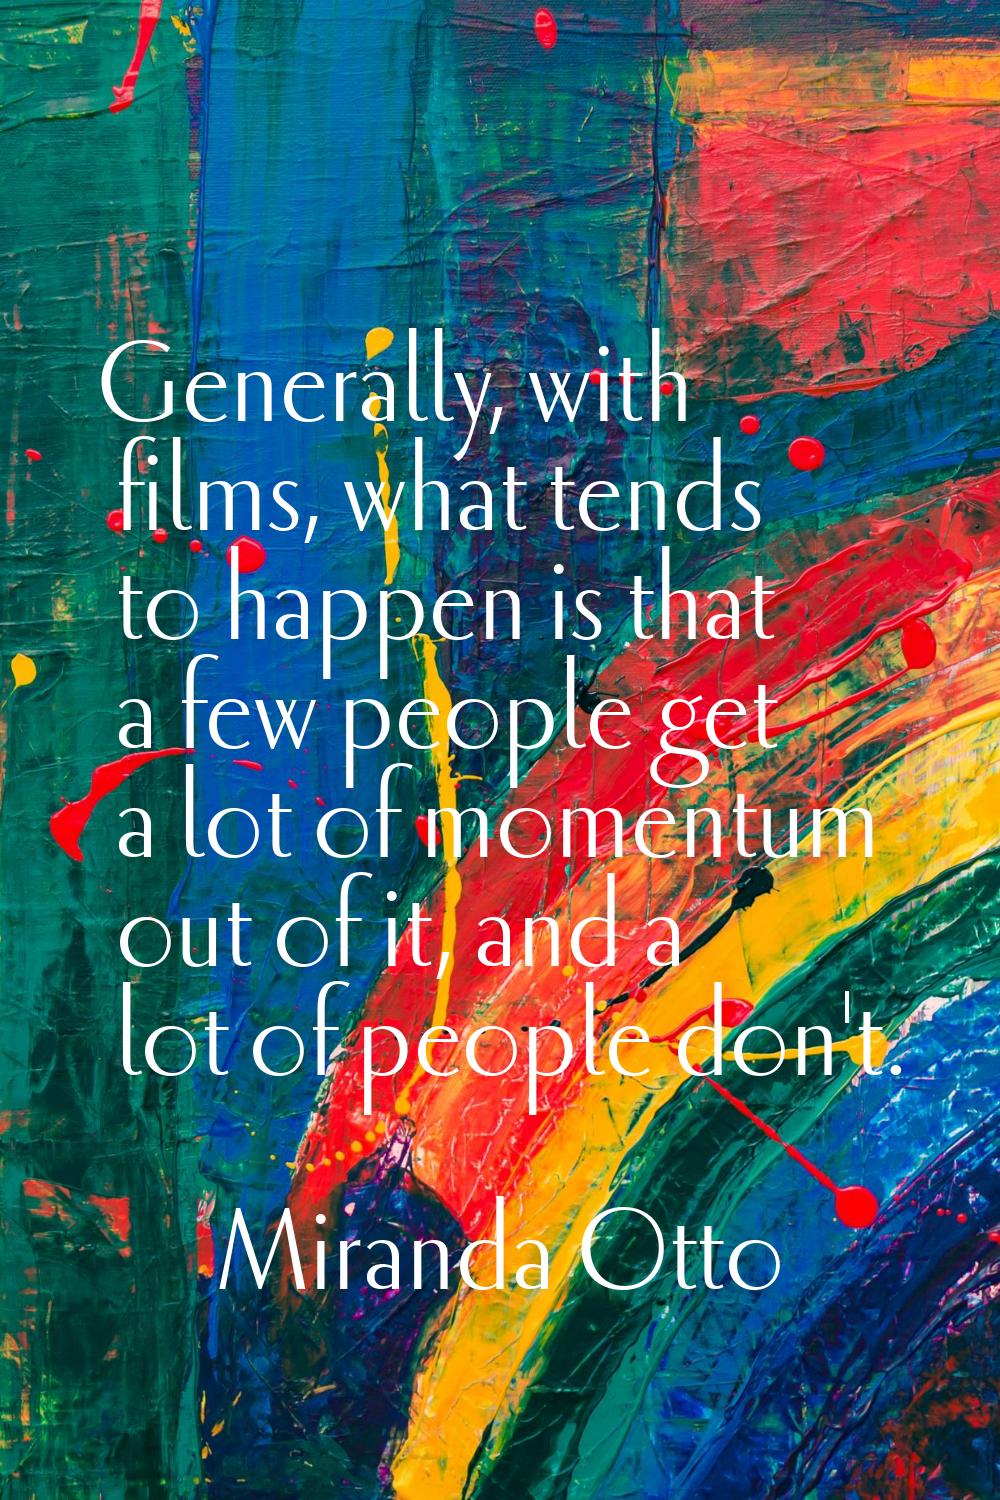 Generally, with films, what tends to happen is that a few people get a lot of momentum out of it, a